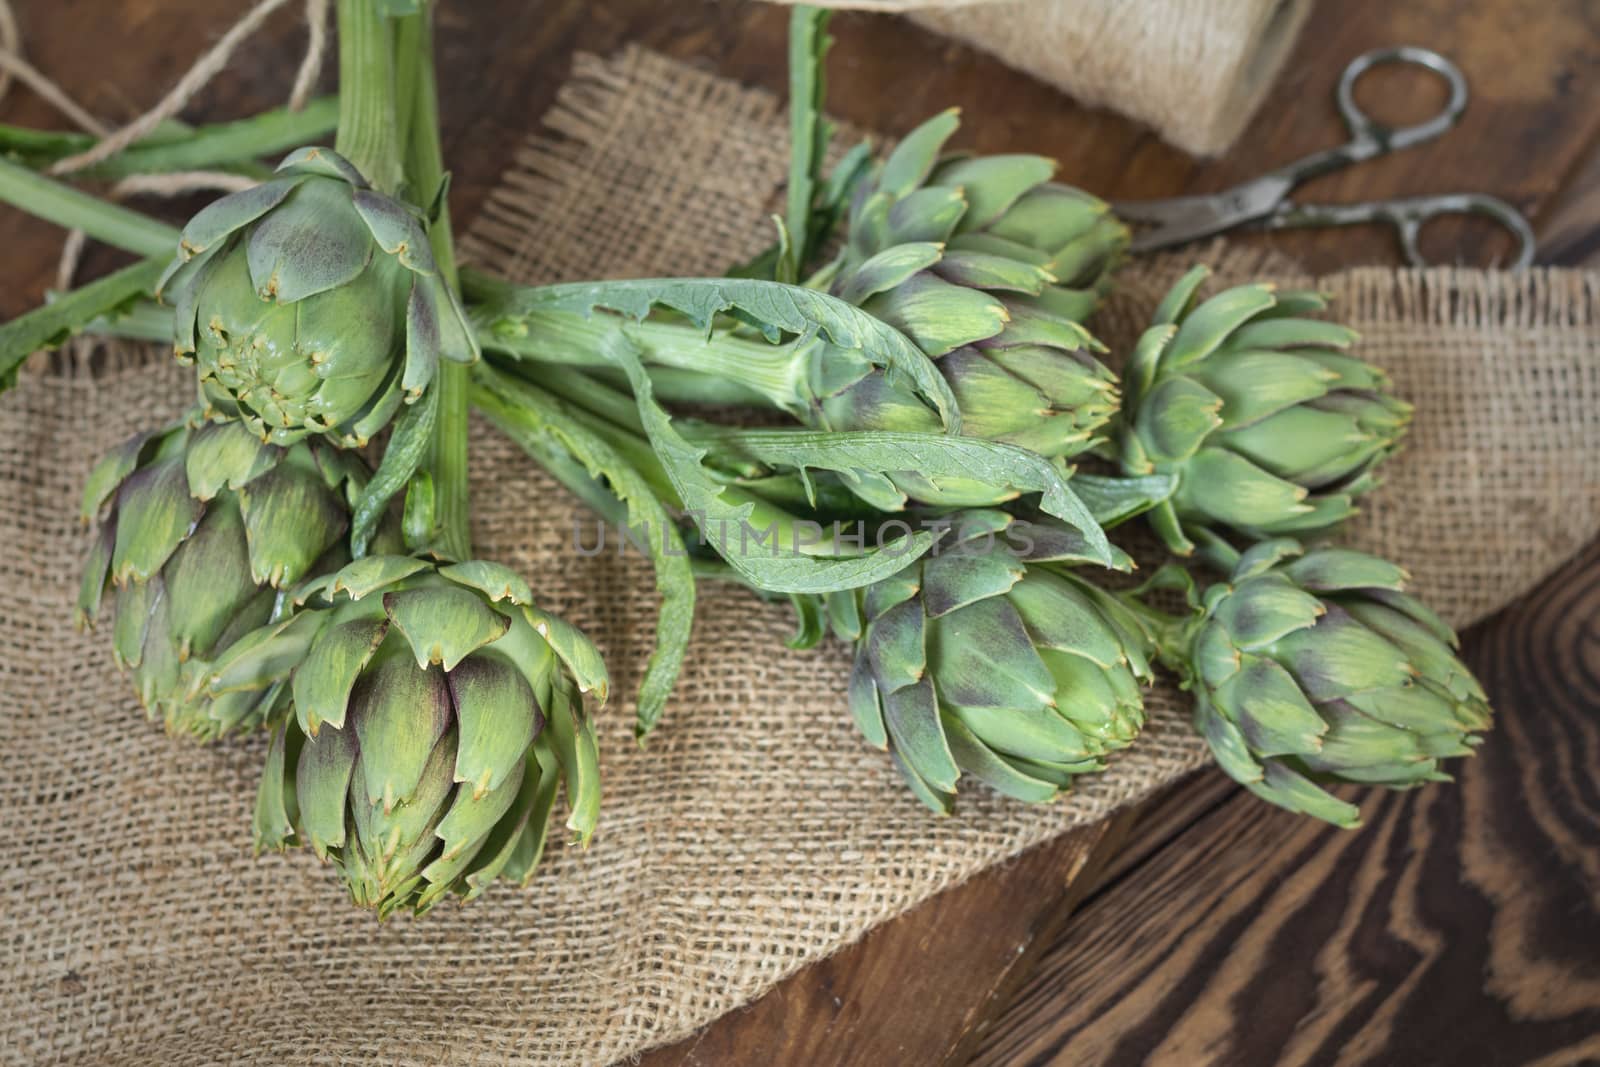 Two artichoke bouquets on sackcloth on wooden background. Top view.